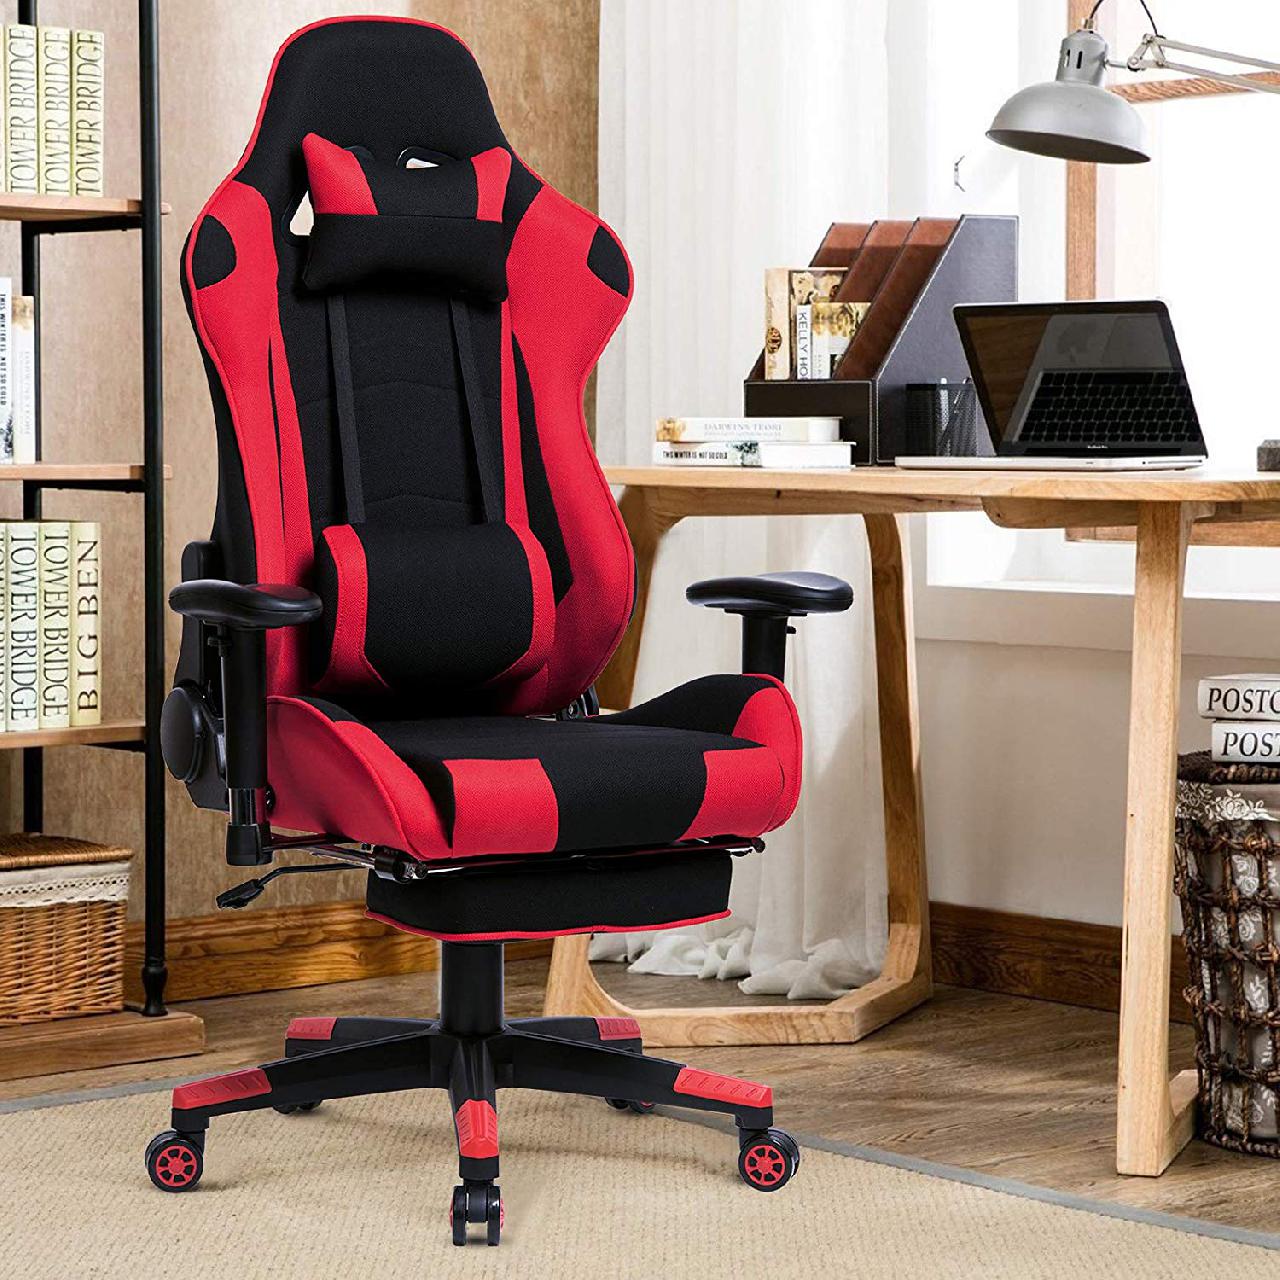 Gaming chair made of fabric with footrest in ergonomic